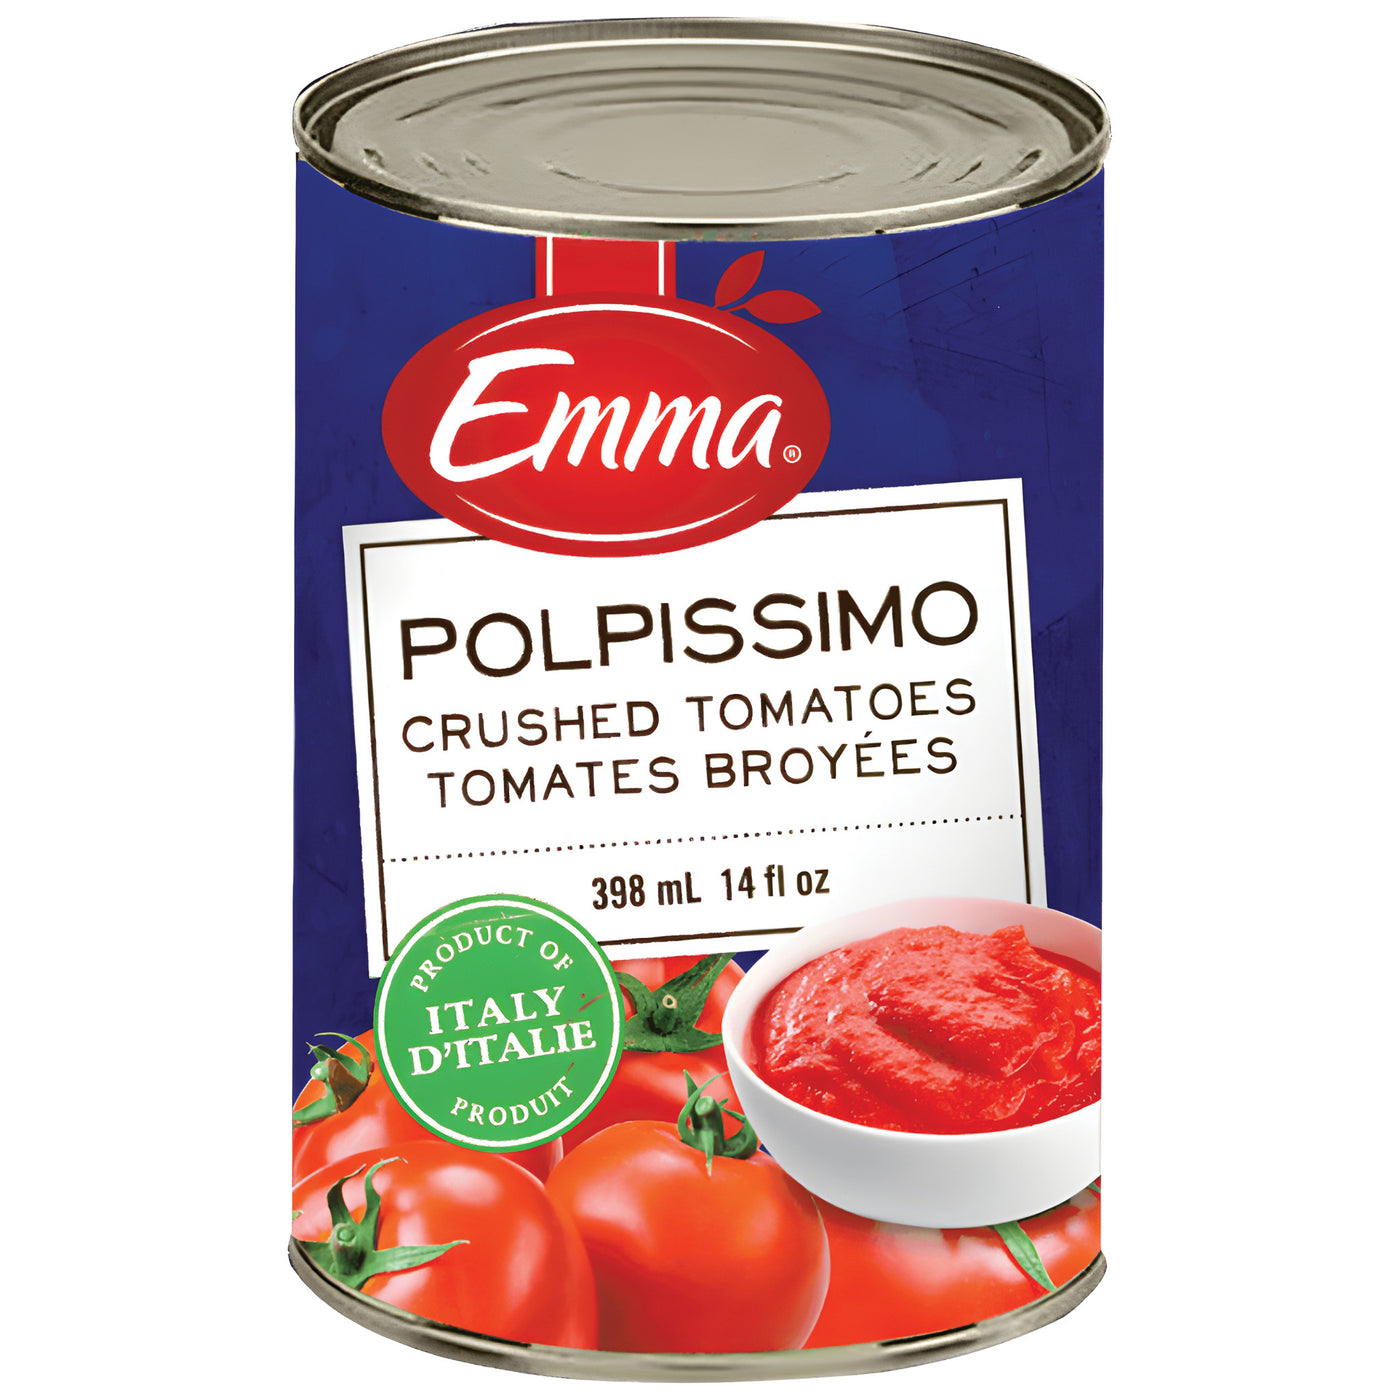 Polpissimo Crushed Tomatoes